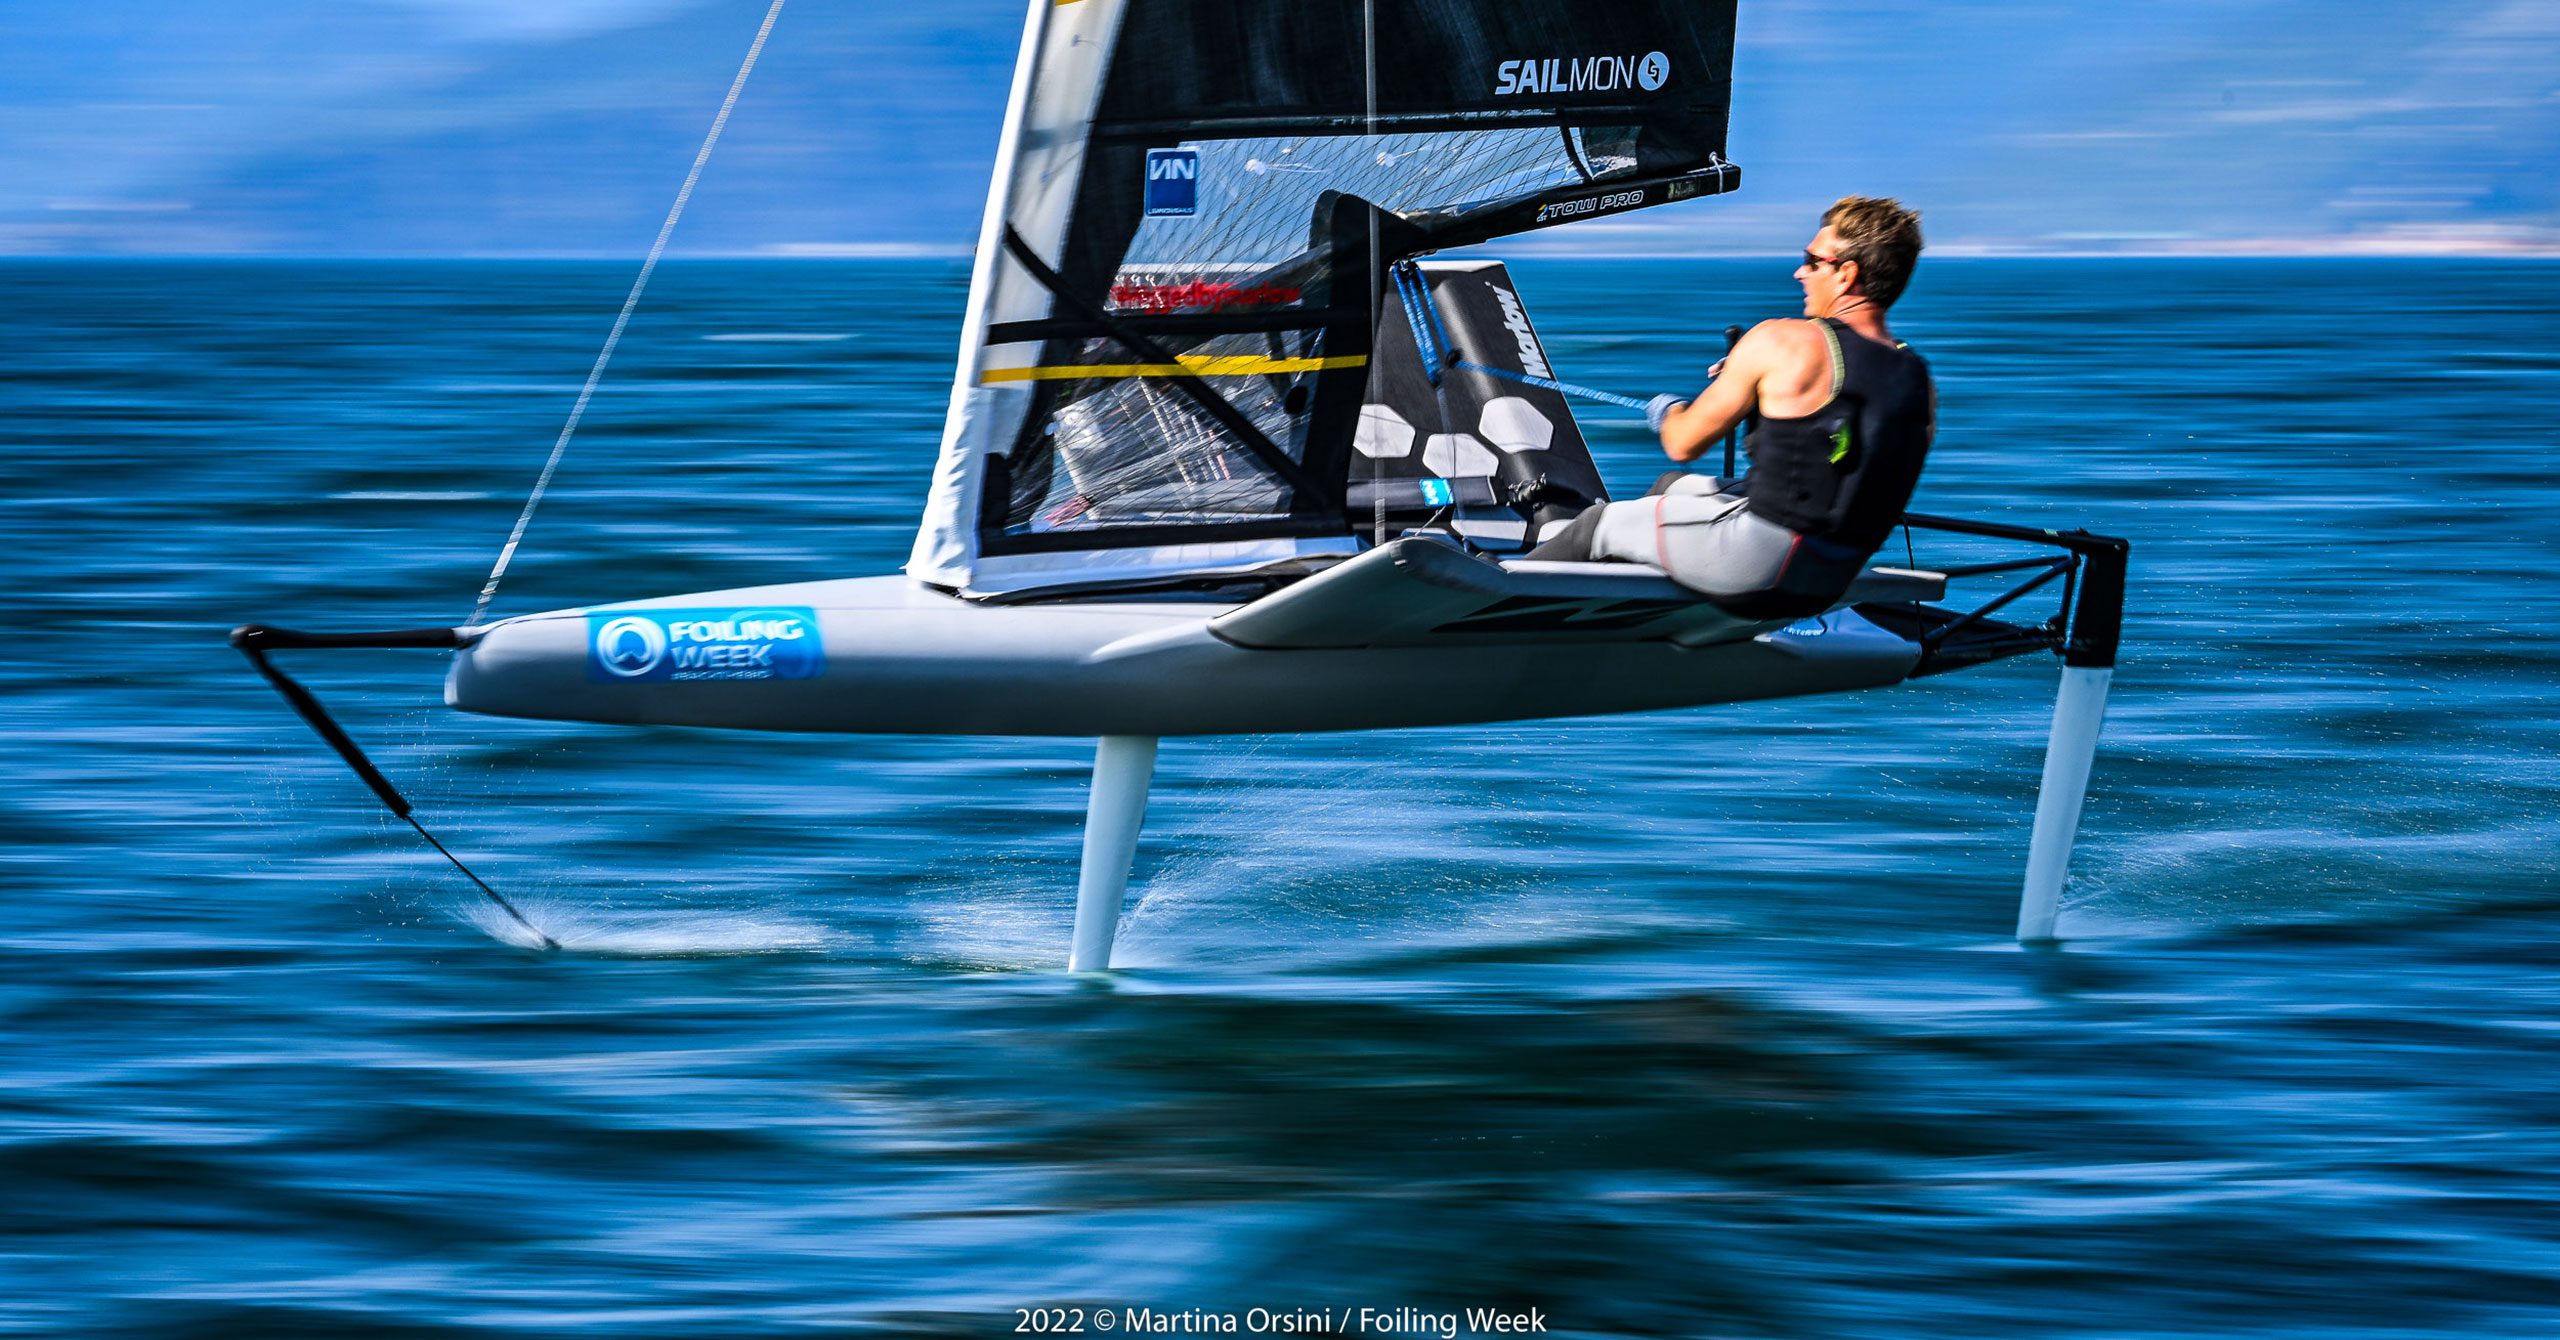 GAC Pindar official logistics partner of the foiling youth world series